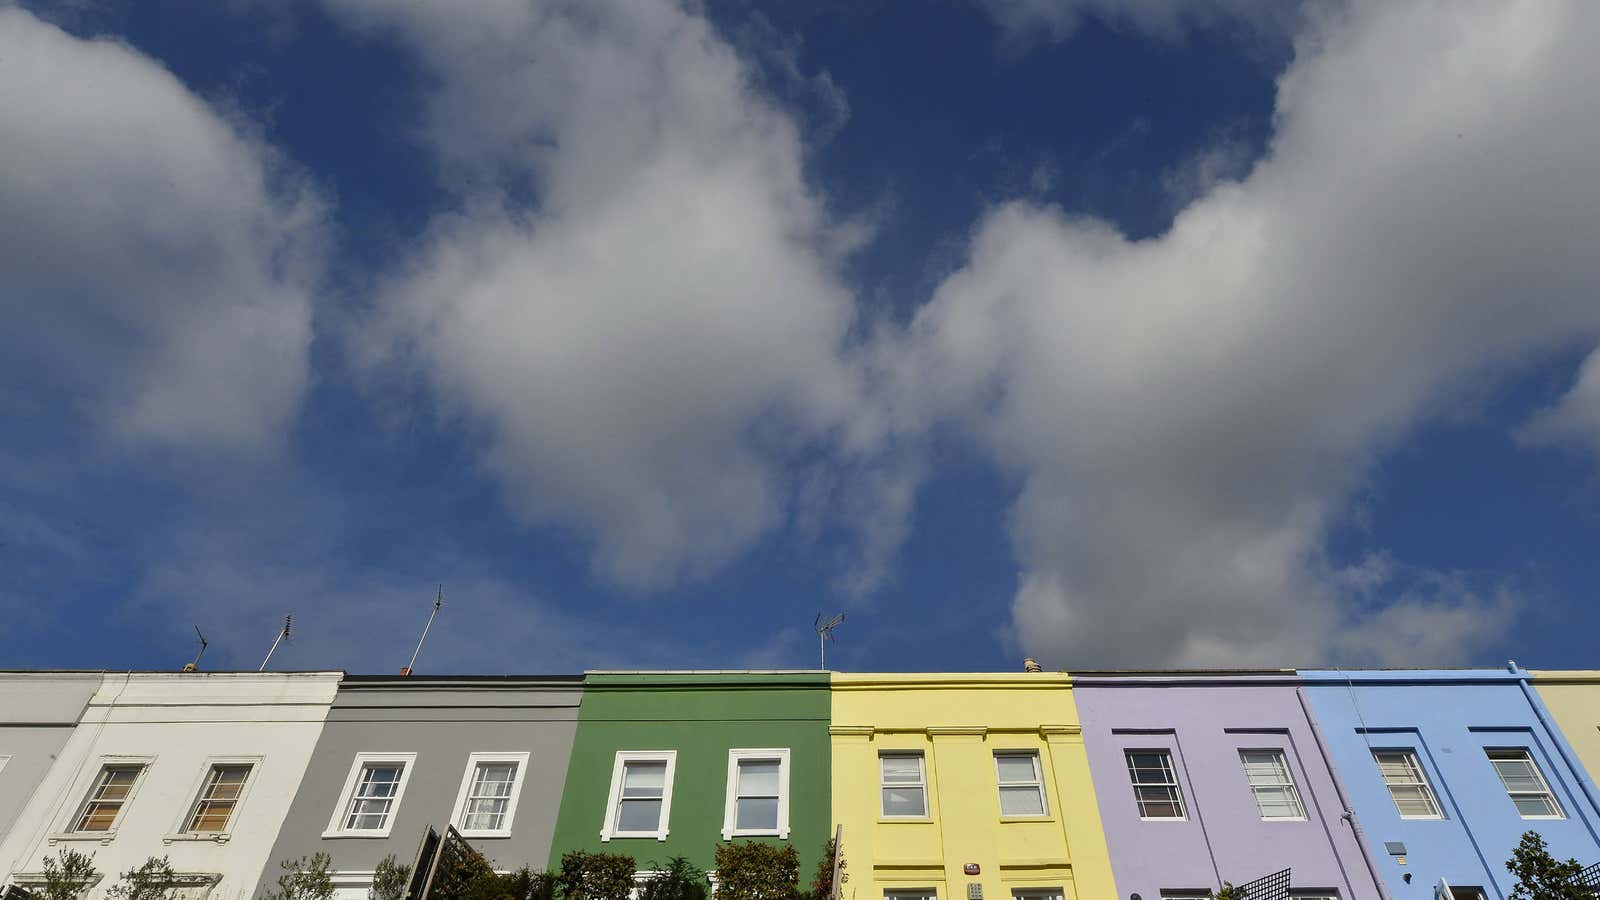 For London property prices, the sky is the limit.